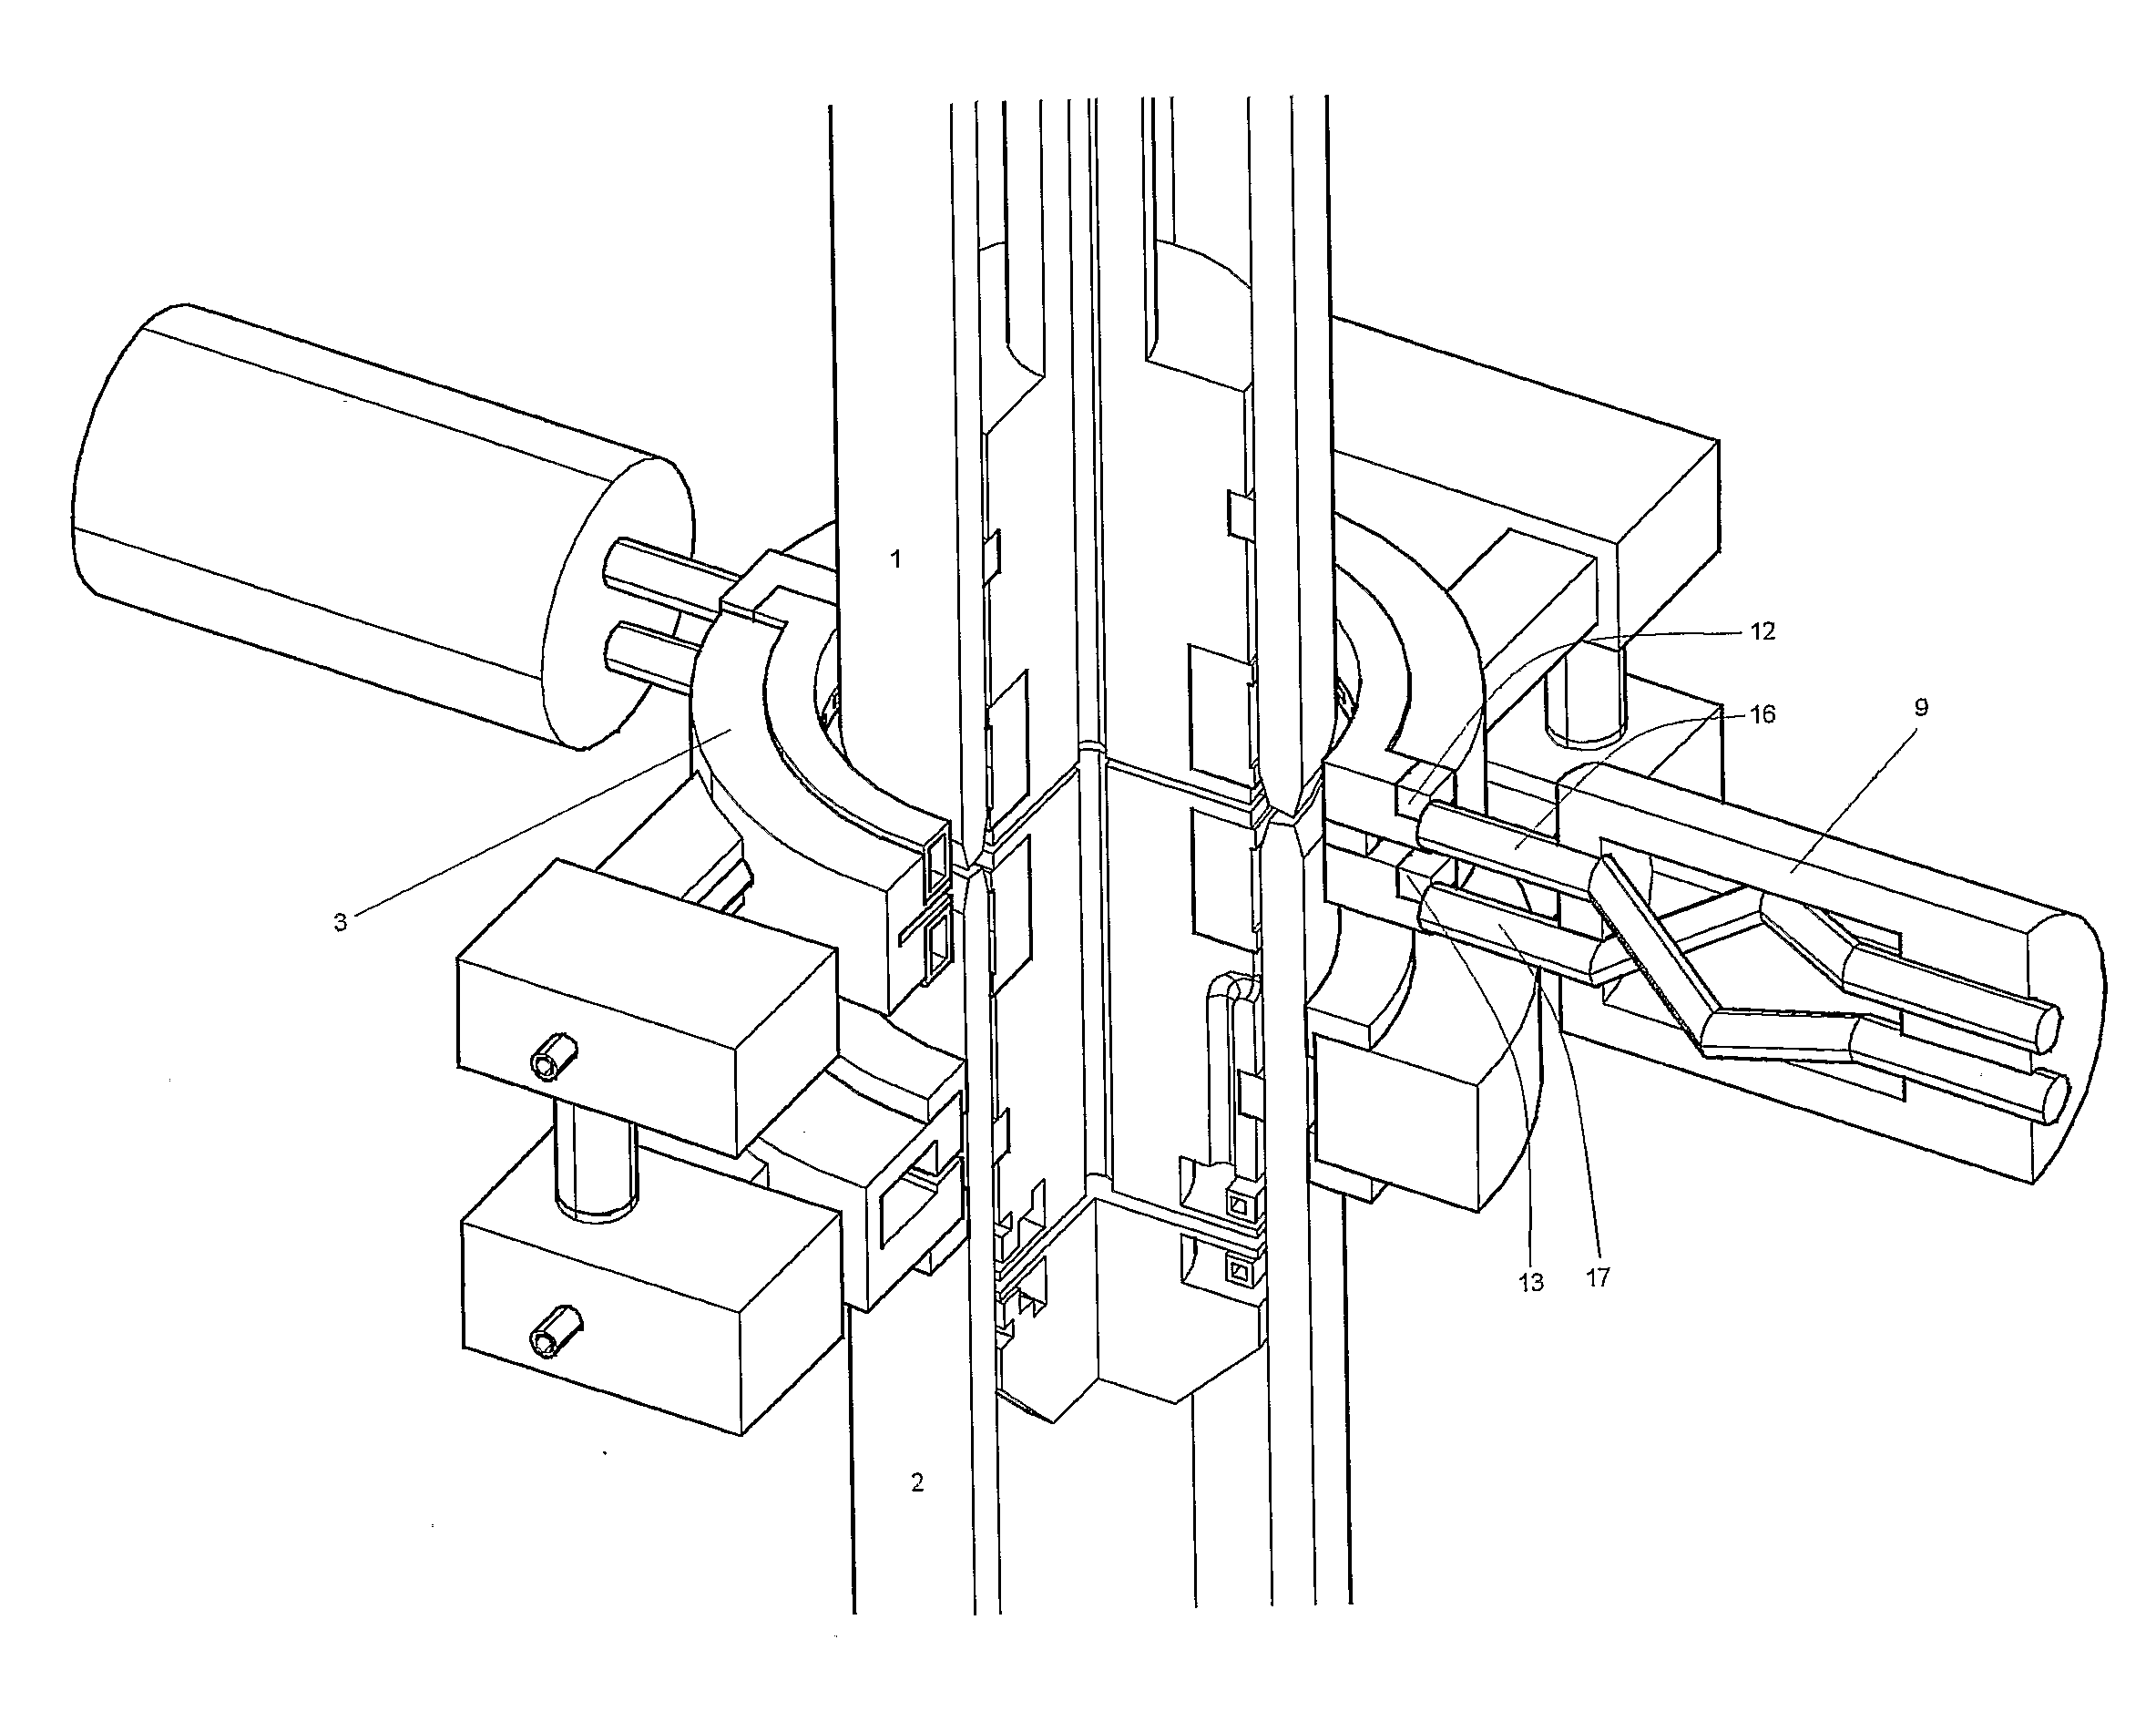 Apparatuses For and Methods of Forge Welding Elongated Articles with Electrodes and an Induction Coil